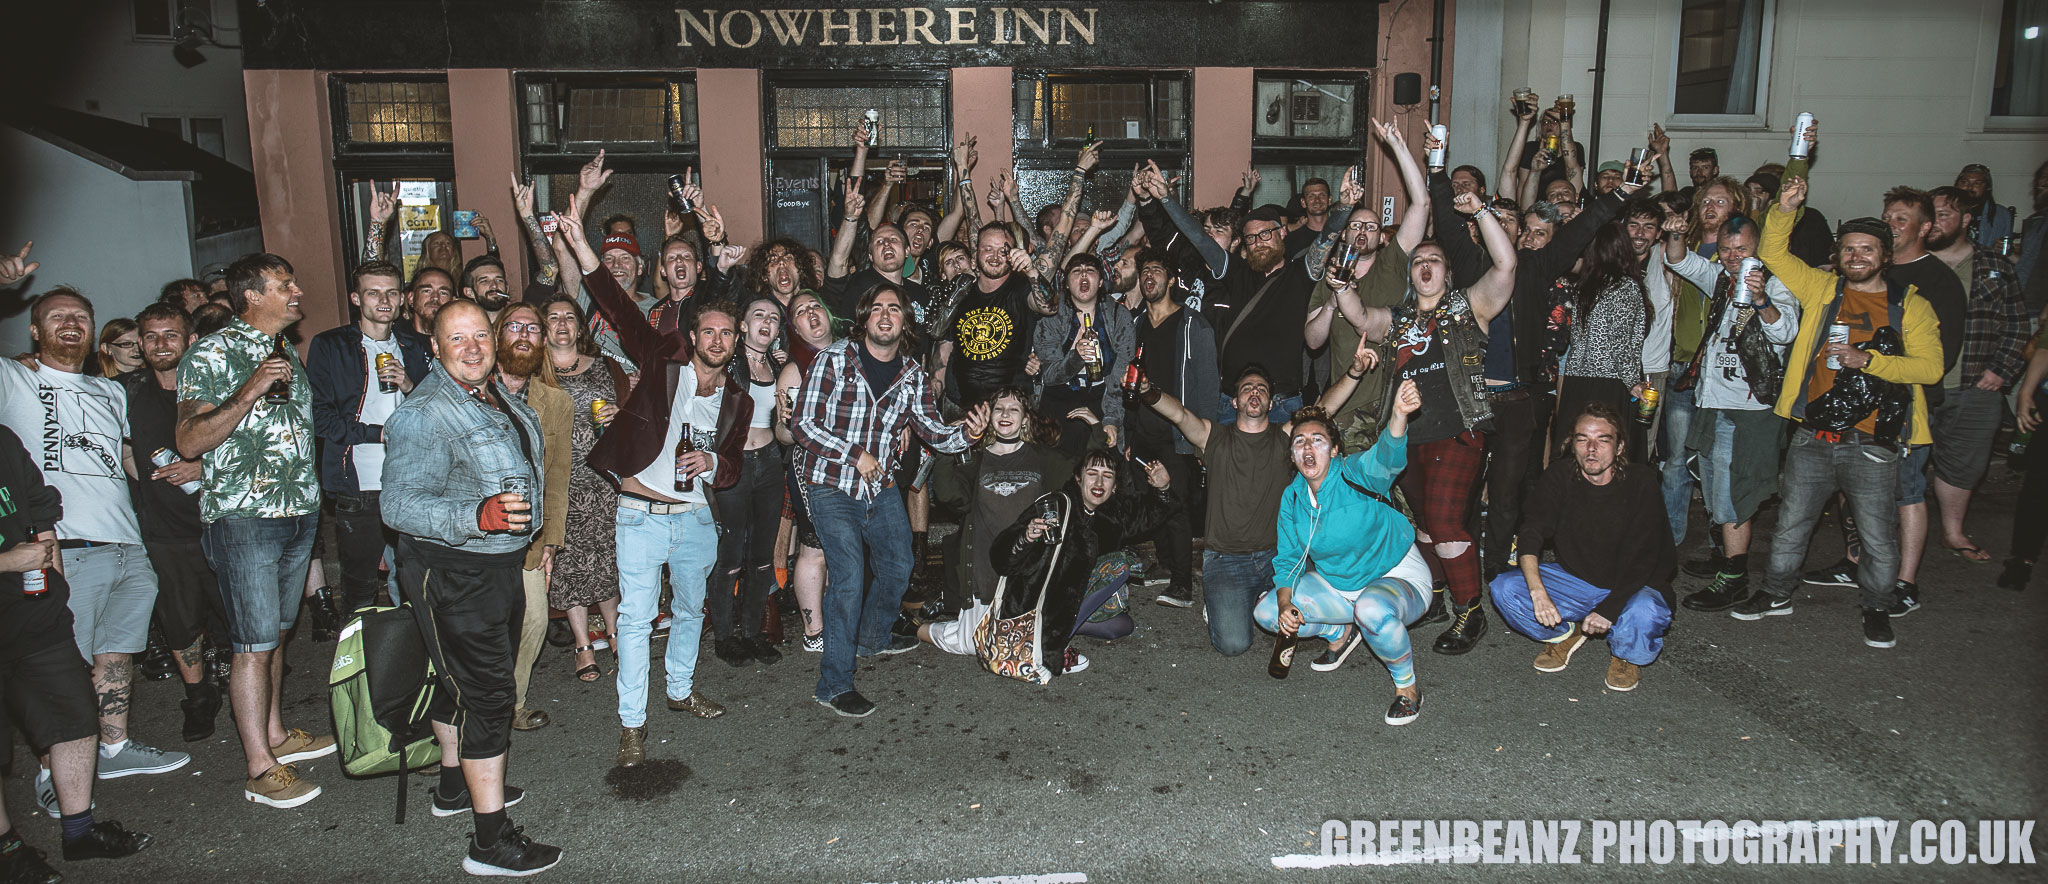 The last night of The Nowhere Inn JULY 2019